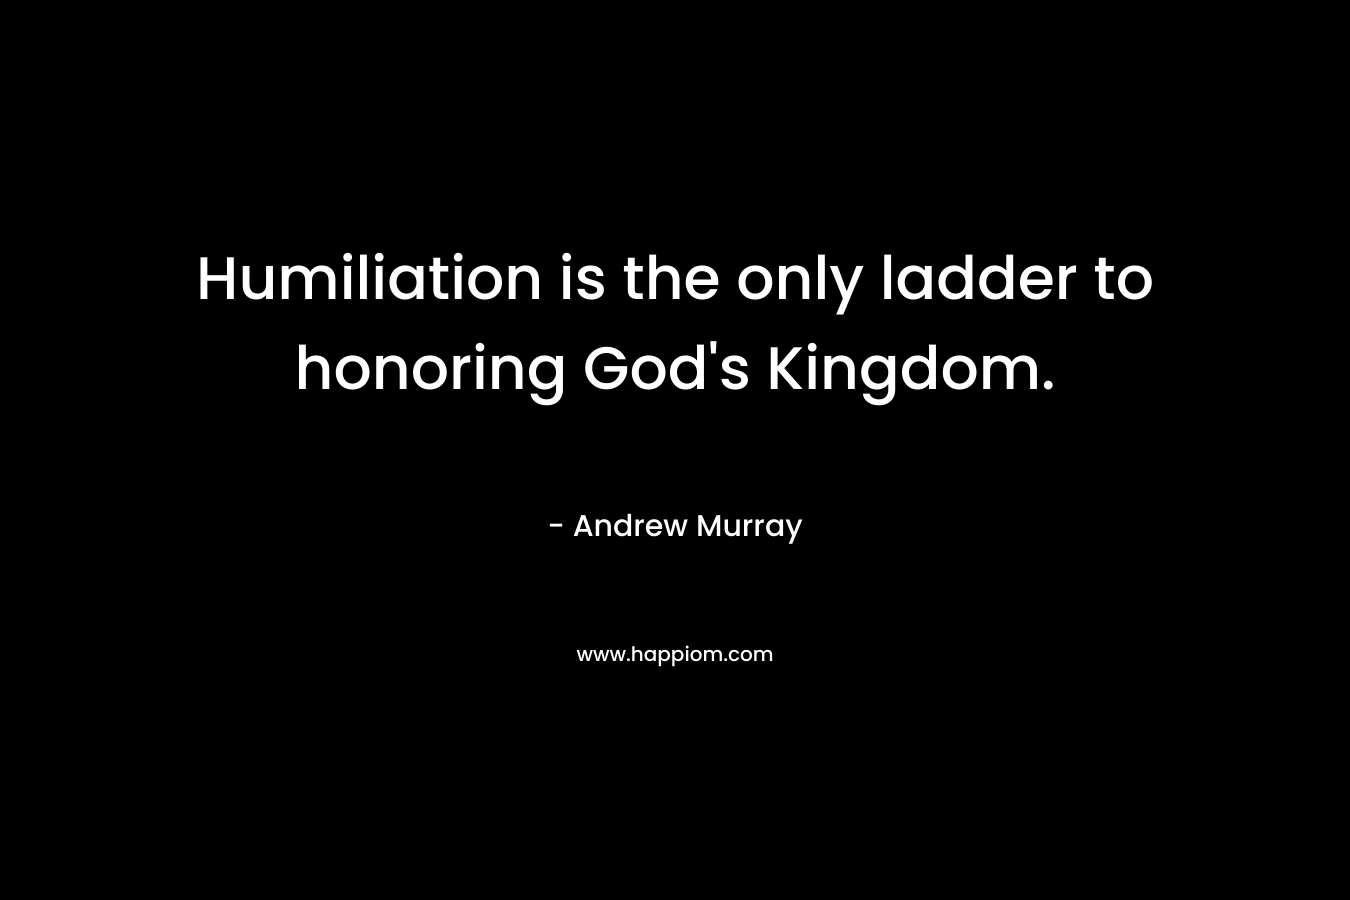 Humiliation is the only ladder to honoring God’s Kingdom. – Andrew Murray